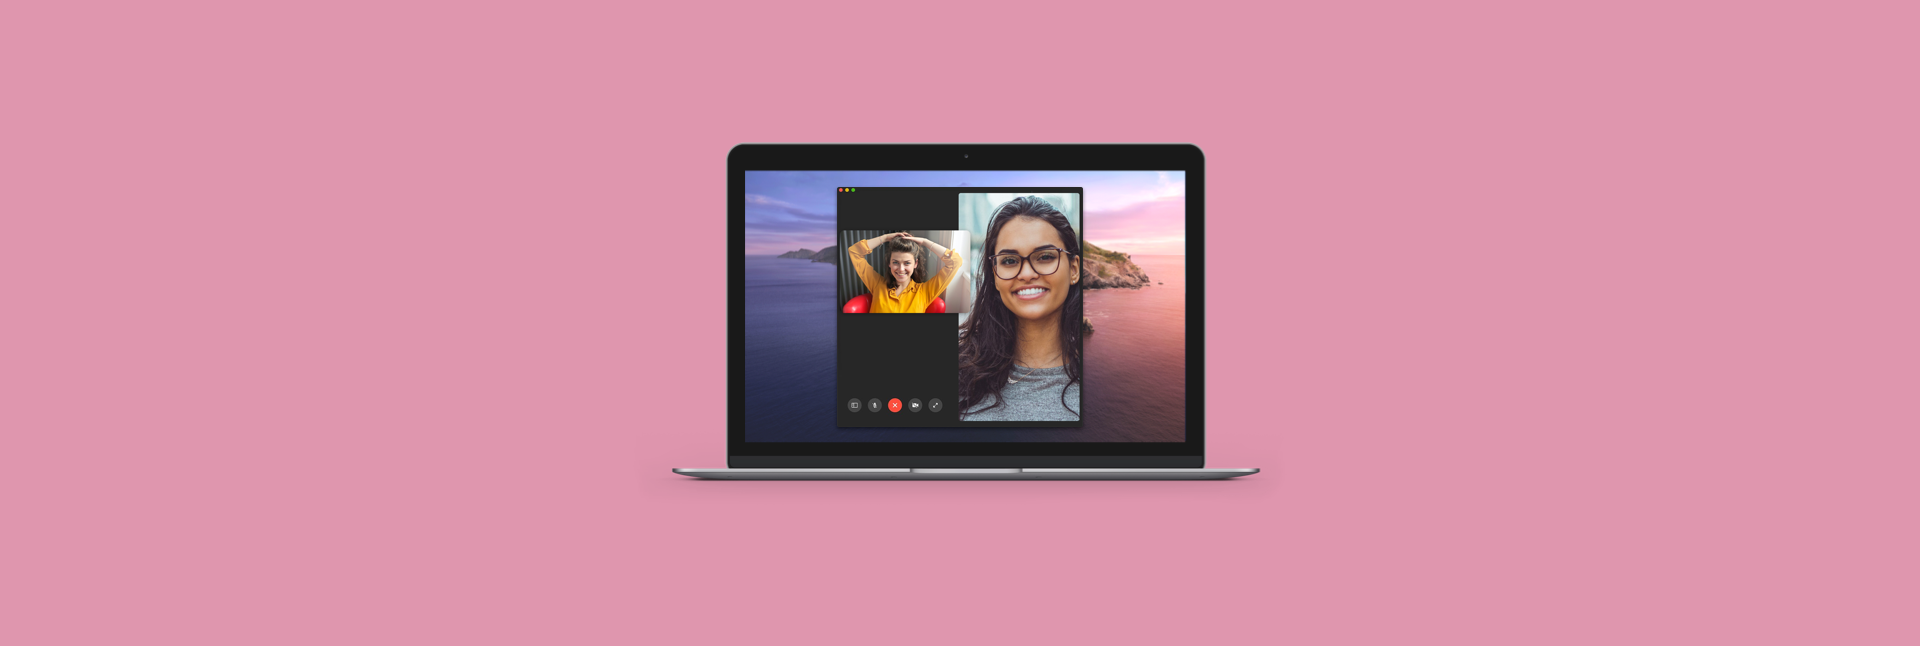 how to use facetime on mac os mojave